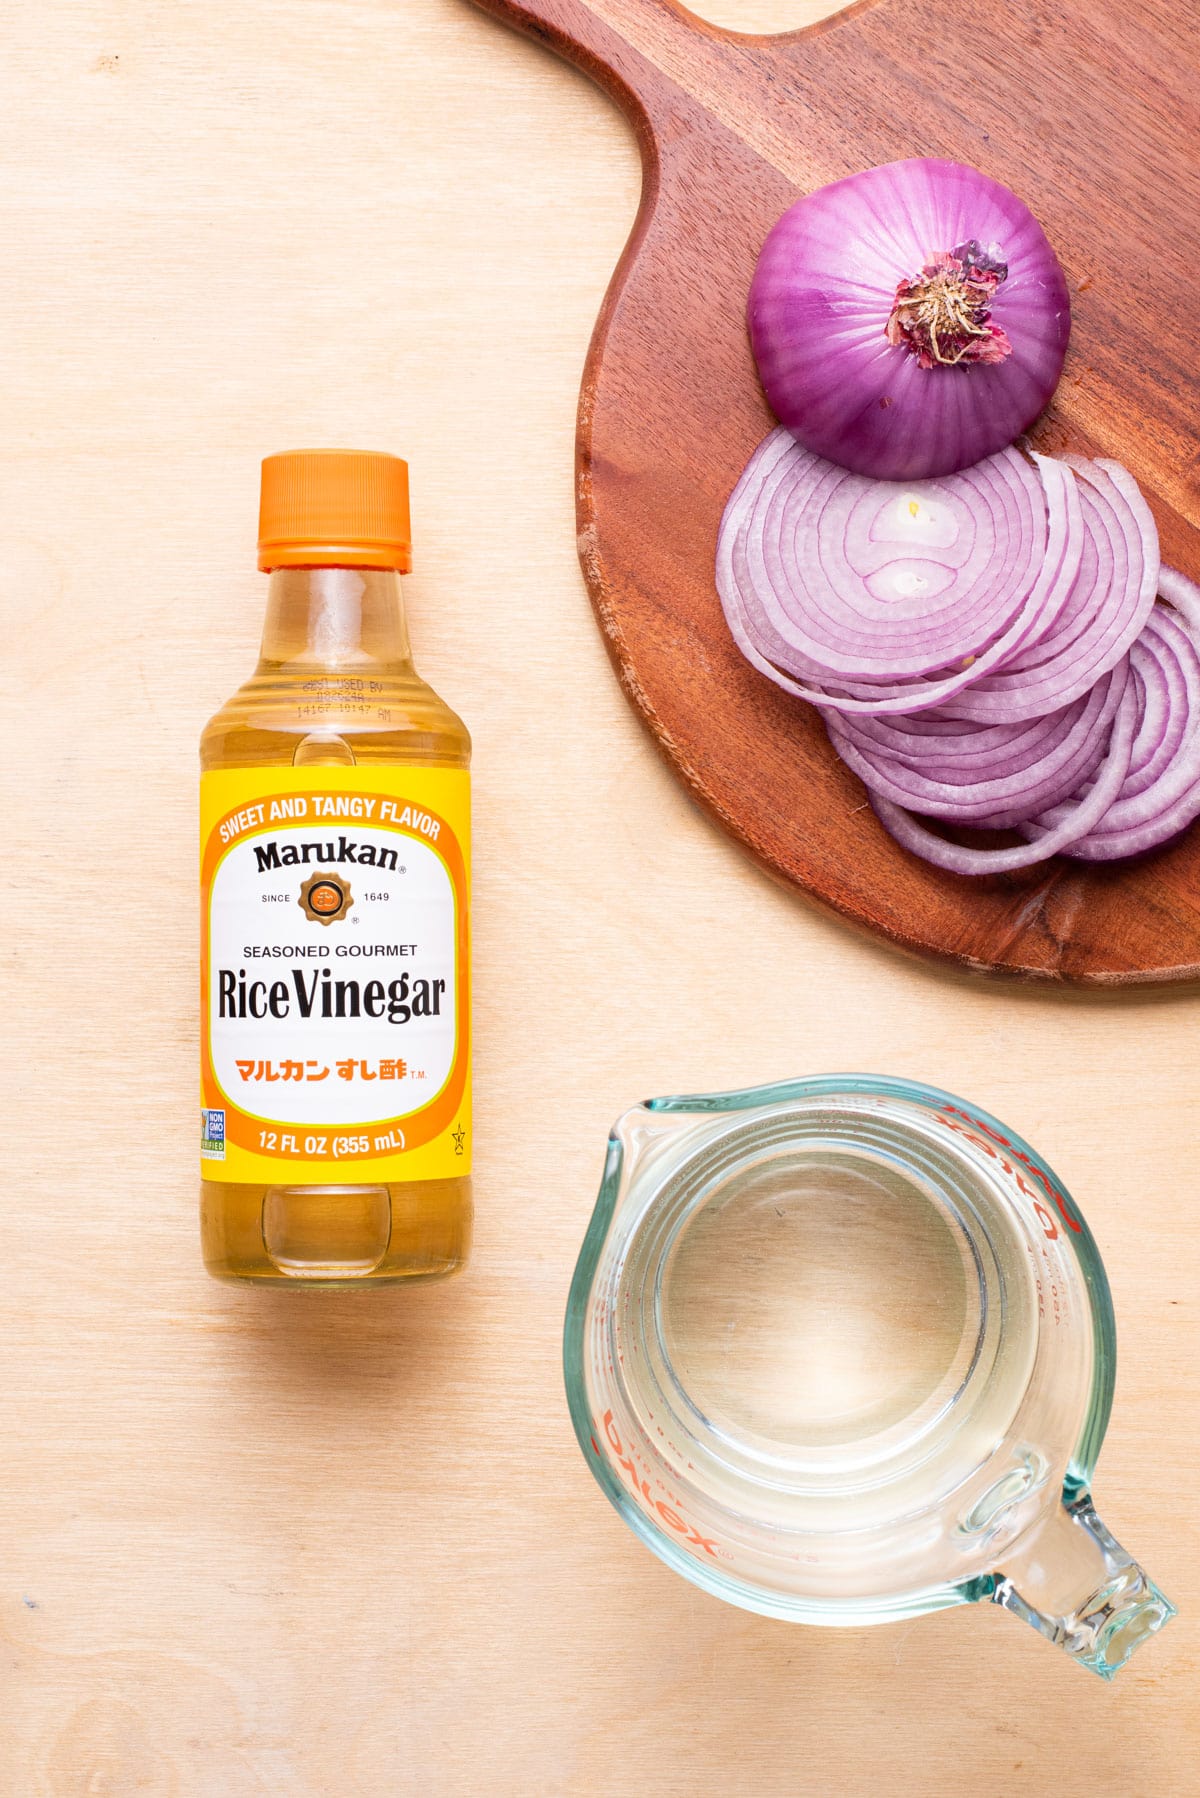 Seasoned rice vinegar, sliced red onion, and water, gathered on a wooden table.